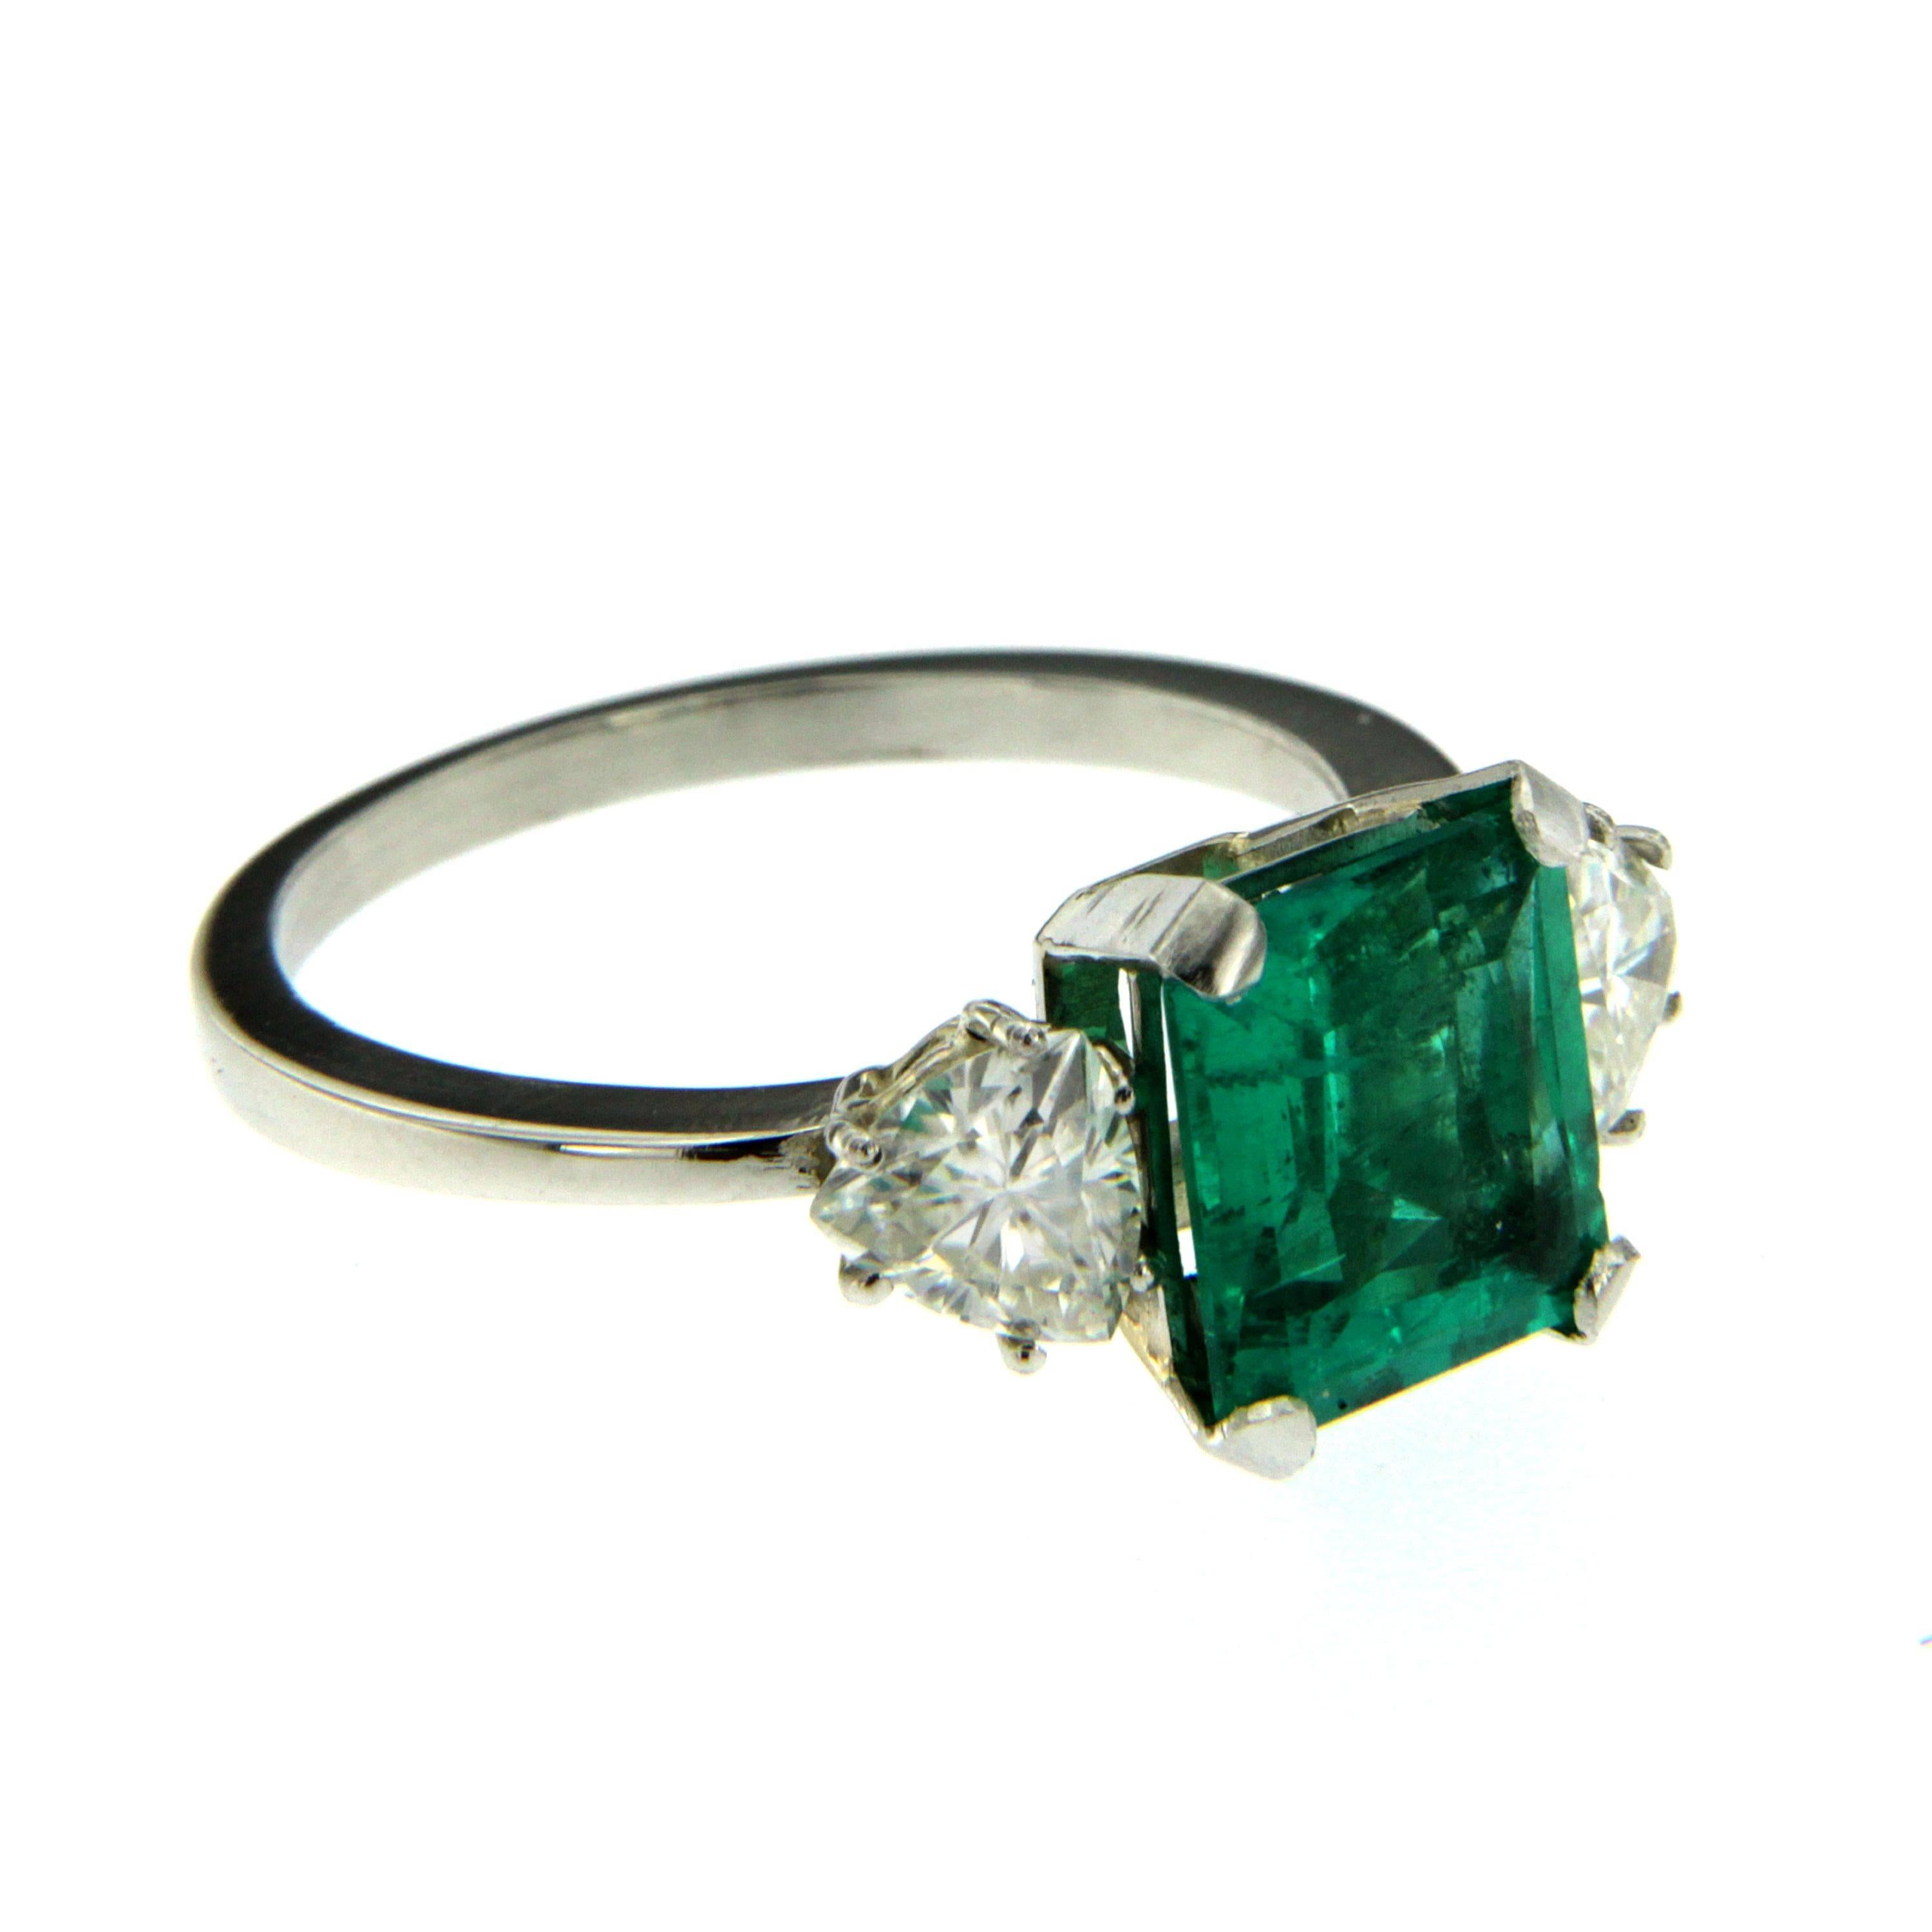 A beautiful Platinum engagement ring showcasing a natural Colombian Emerald approx. 2.75 carats of great quality, surrounded by approx. 1.00 carat of trillion cut diamonds graded H-I color Vvs.

CONDITION: Pre-owned - Excellent 
METAL: Platinum
GEM